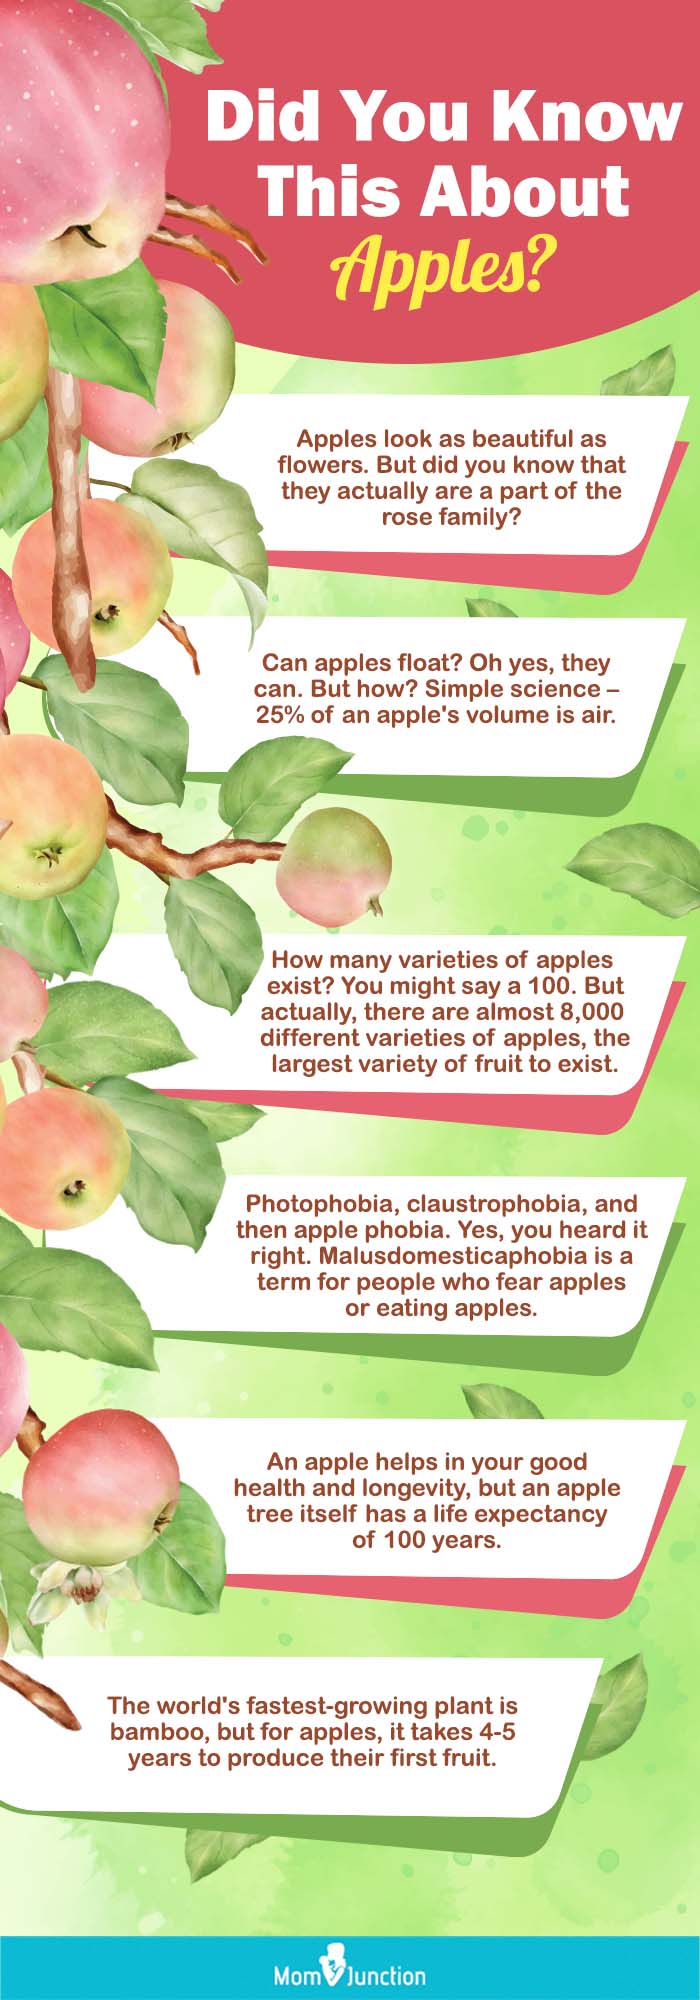 did you know this about apples? (infographic)